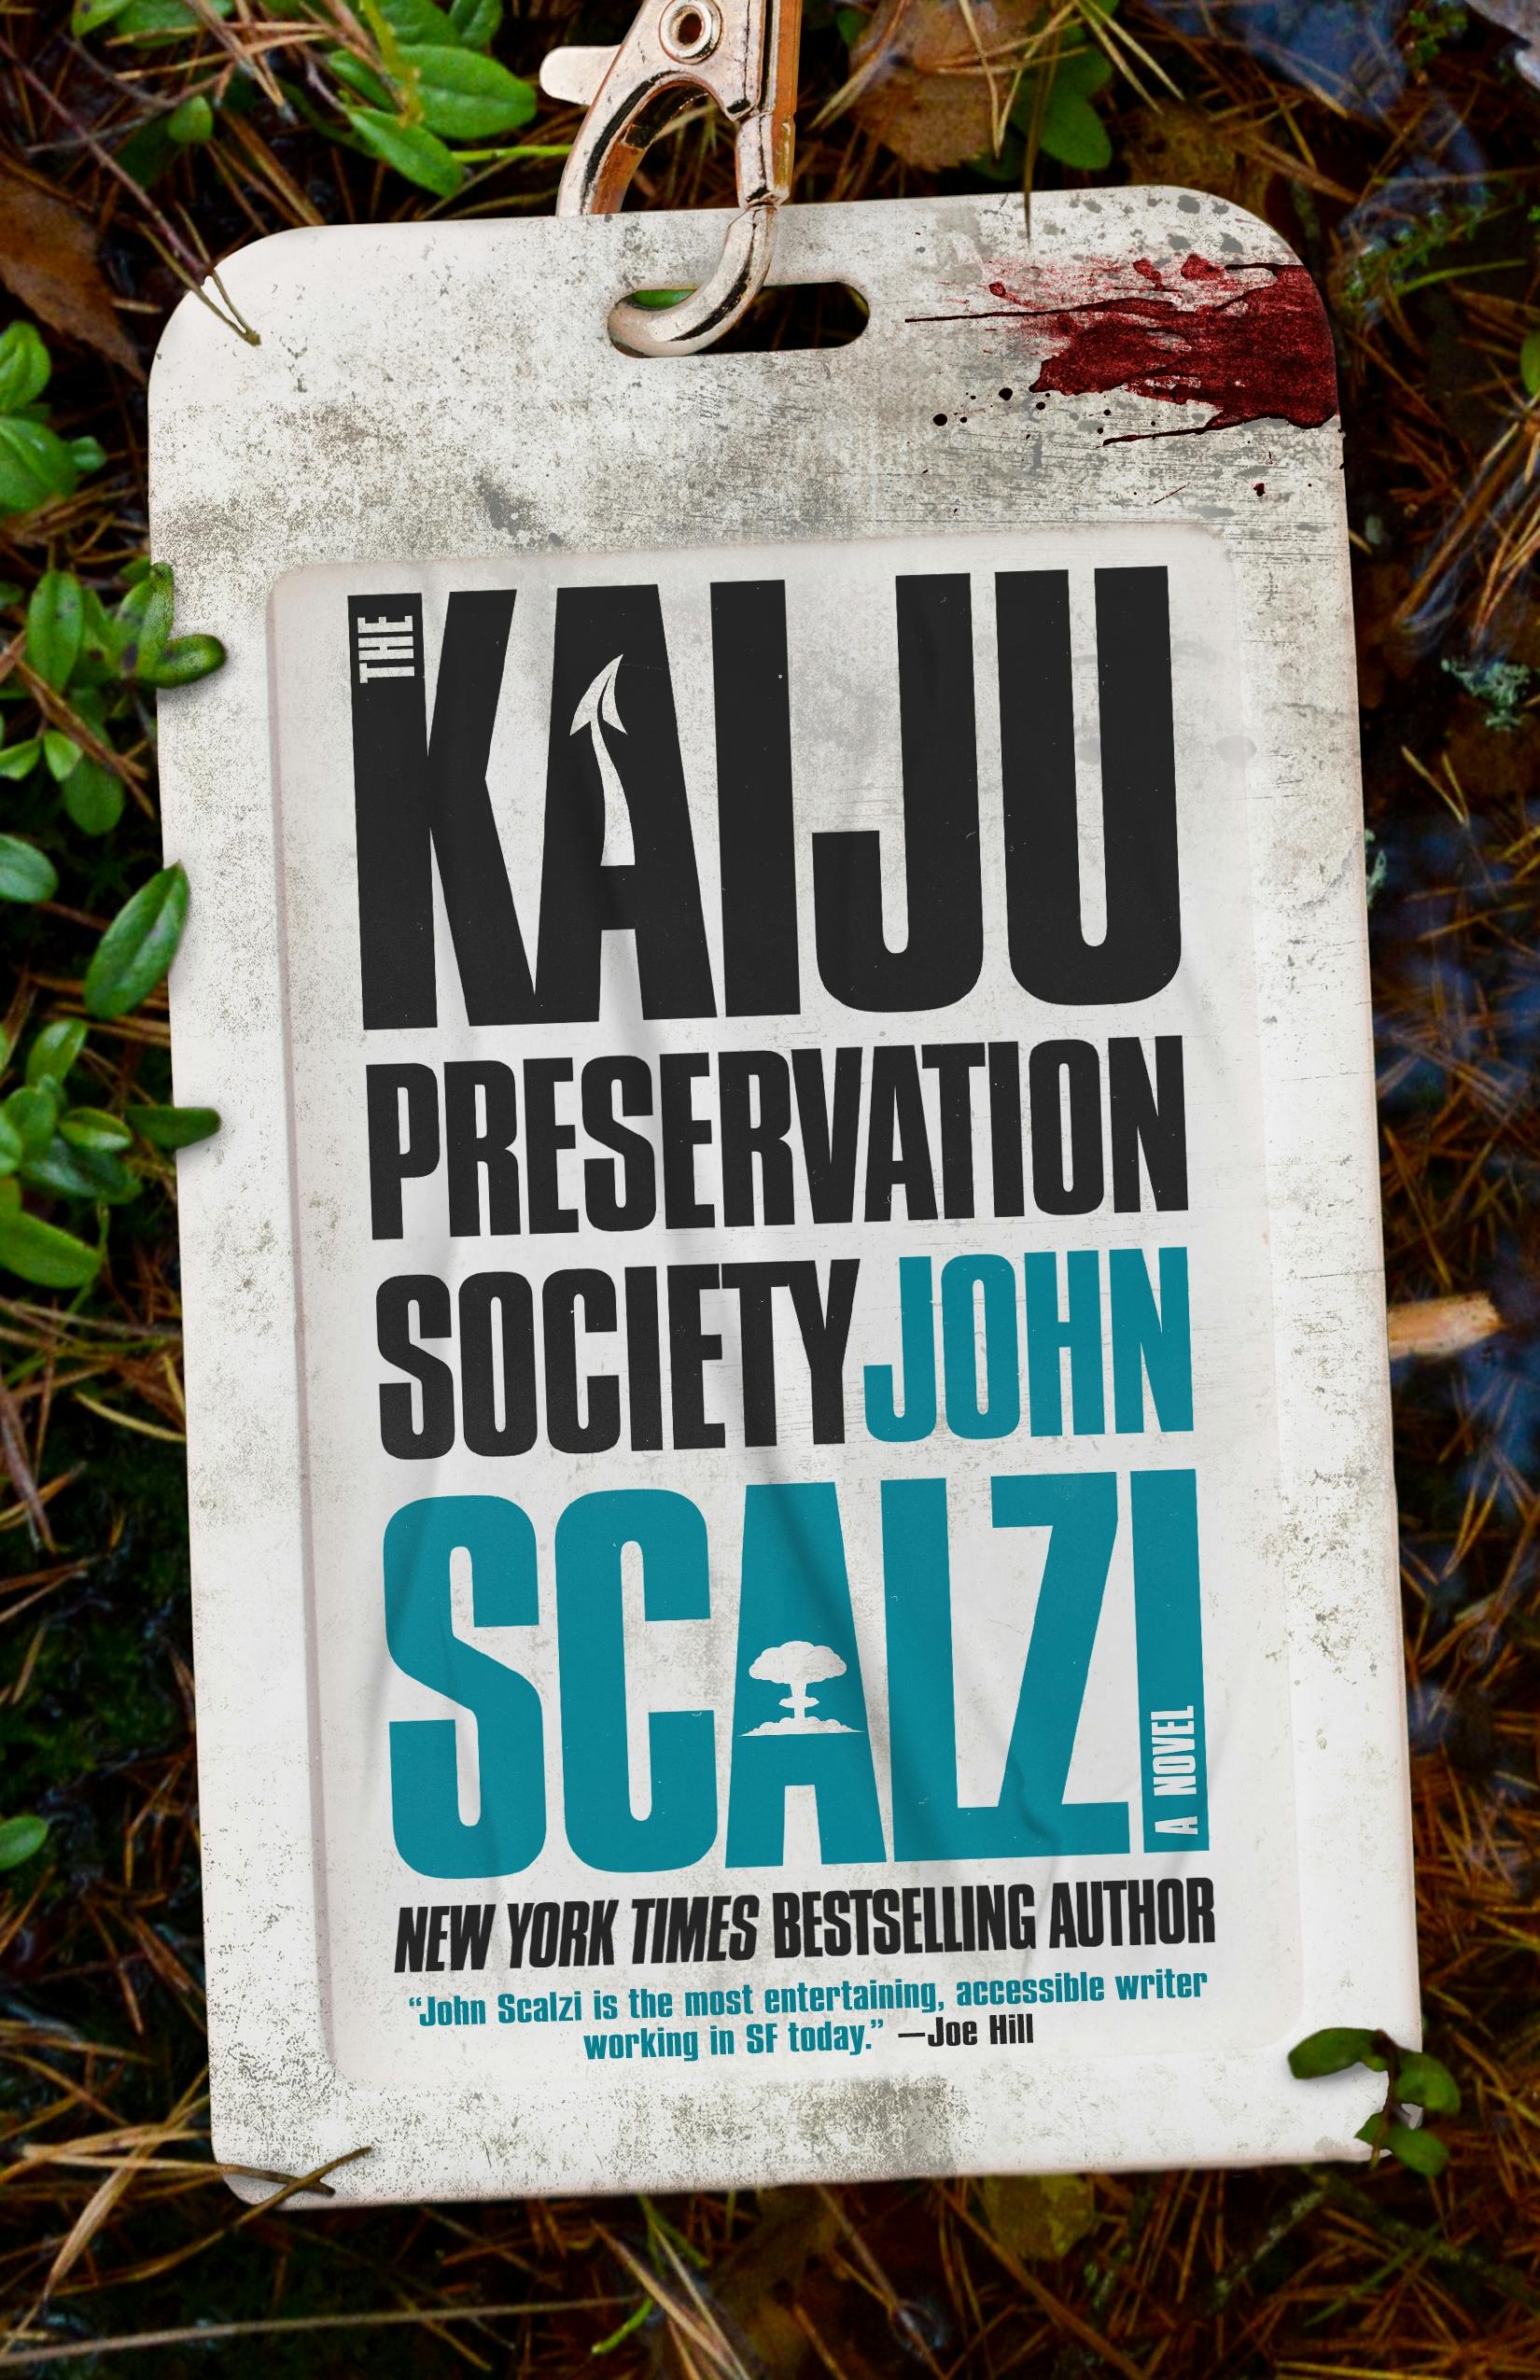 Cover for the book titled as: The Kaiju Preservation Society